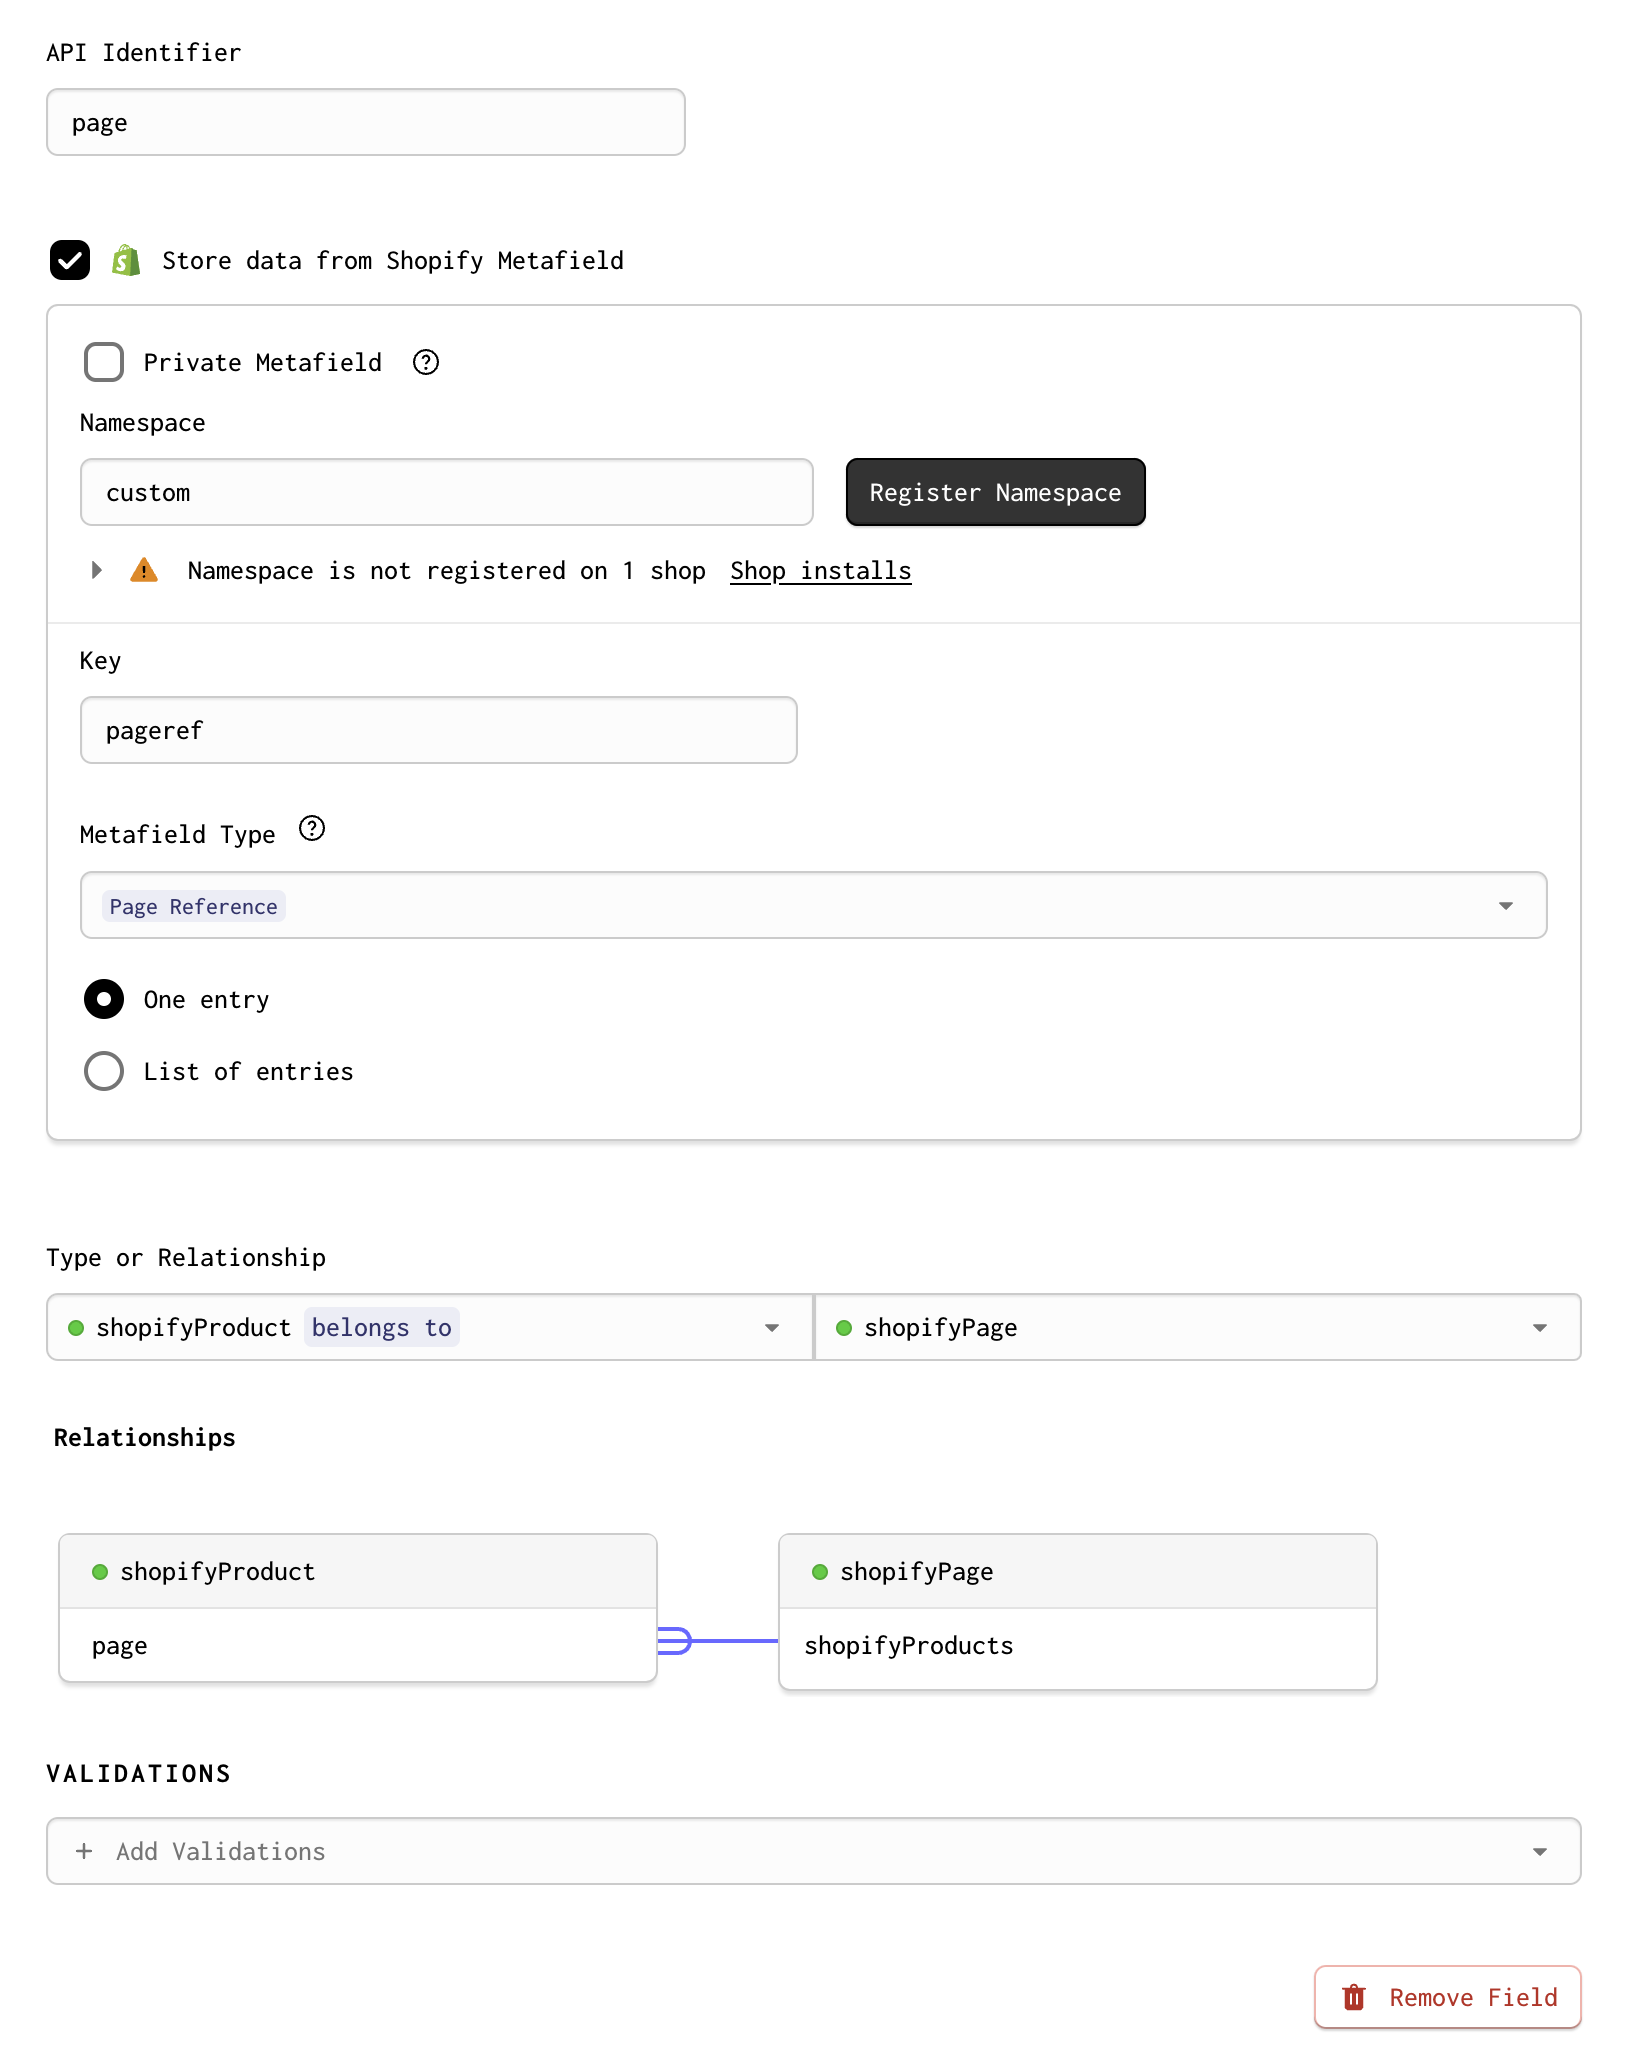 A screenshot of a page reference metafield stored on the shopifyProduct model, modeled as a relationship to the shopifyPage model in Gadget